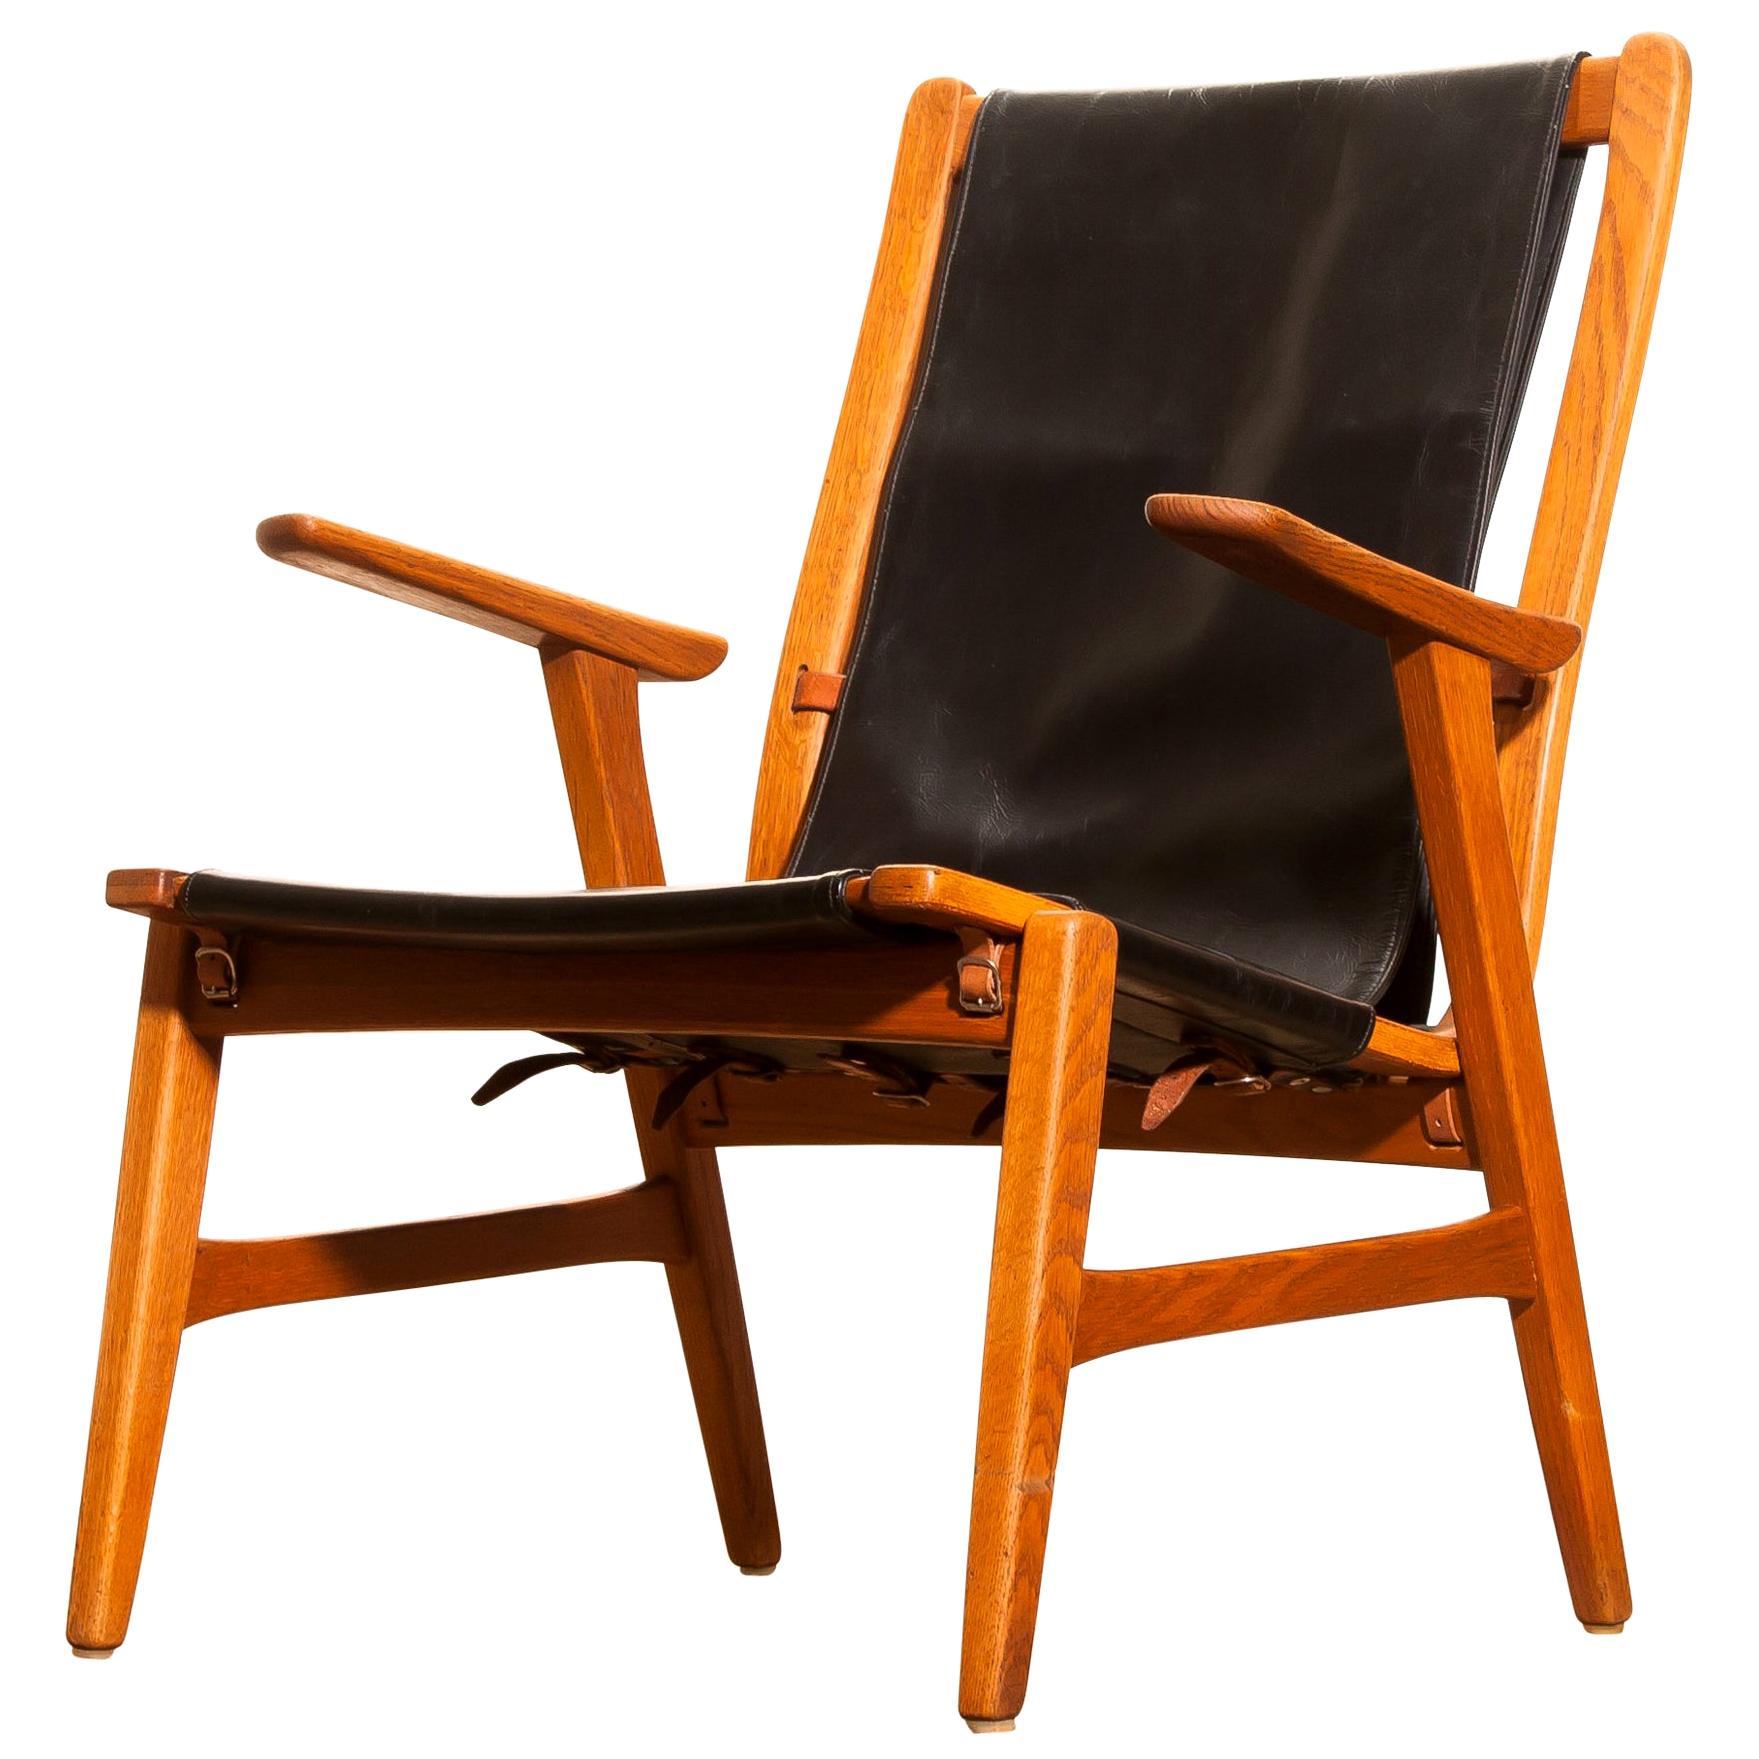 Swedish 1950s, Oak and Leatherette Hunting Chair 'Ulrika' by Östen Kristiansson